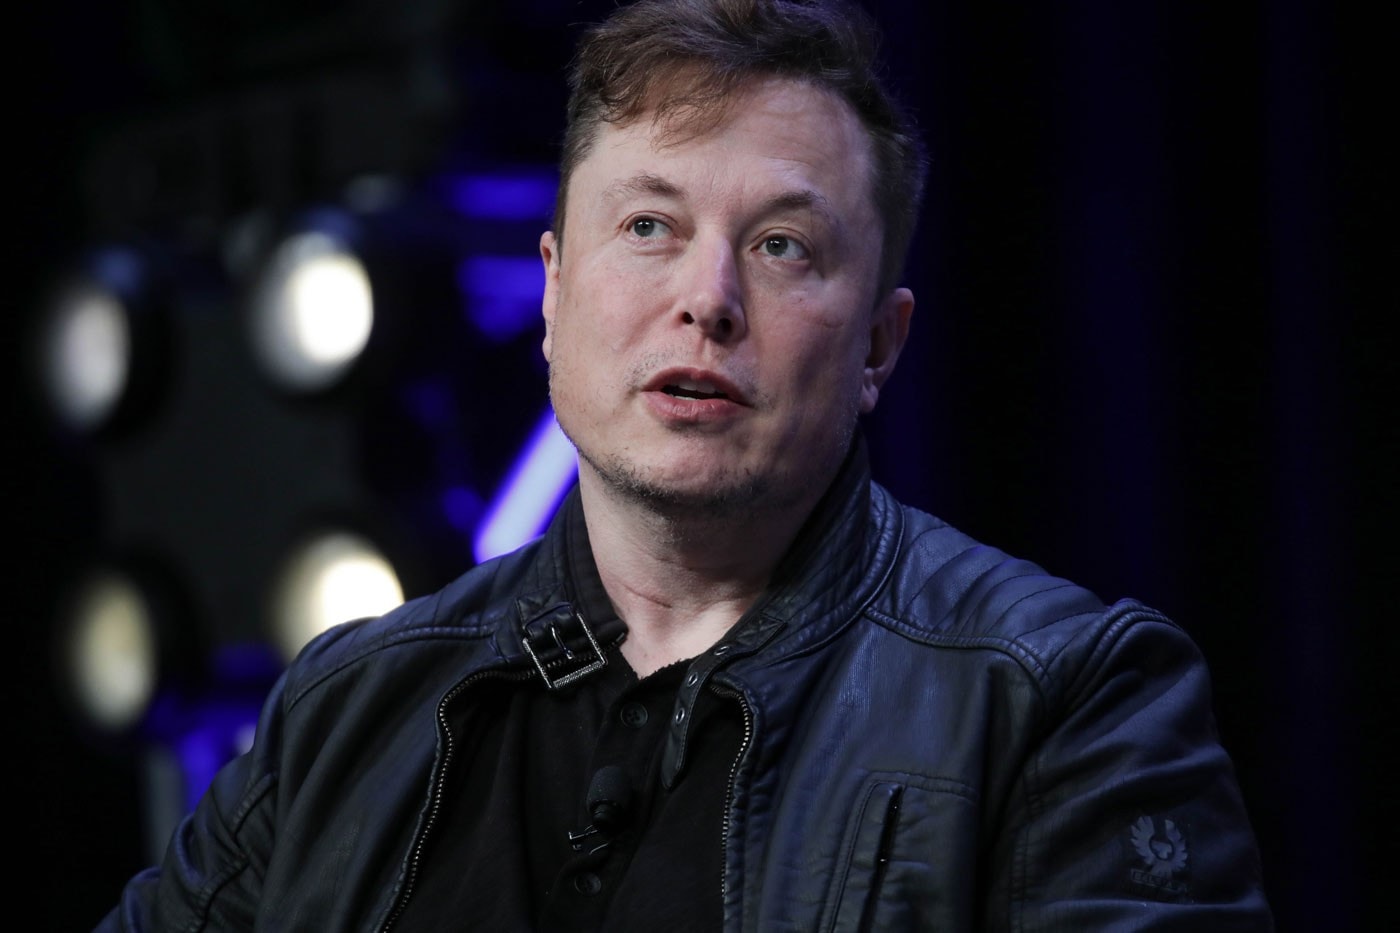 Elon Musk Says He's Homeless Couchsurfing Friends TED Interview Watch